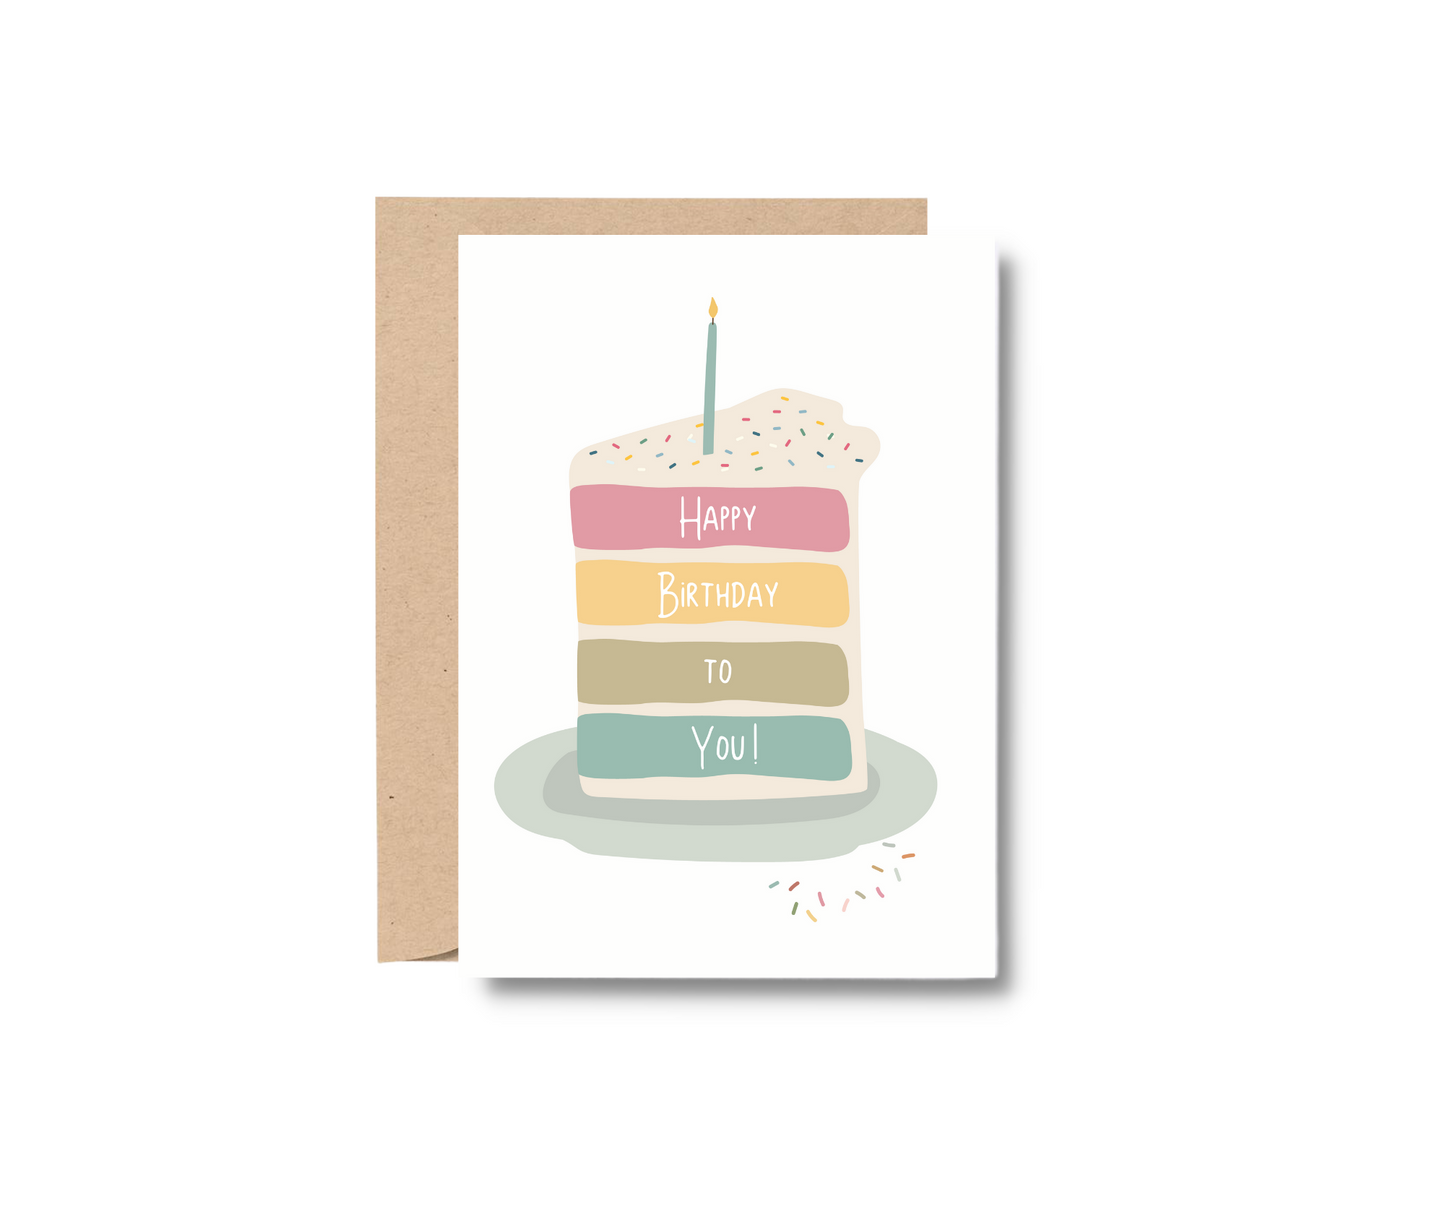 Happy Birthday with Sprinkles Greeting Card